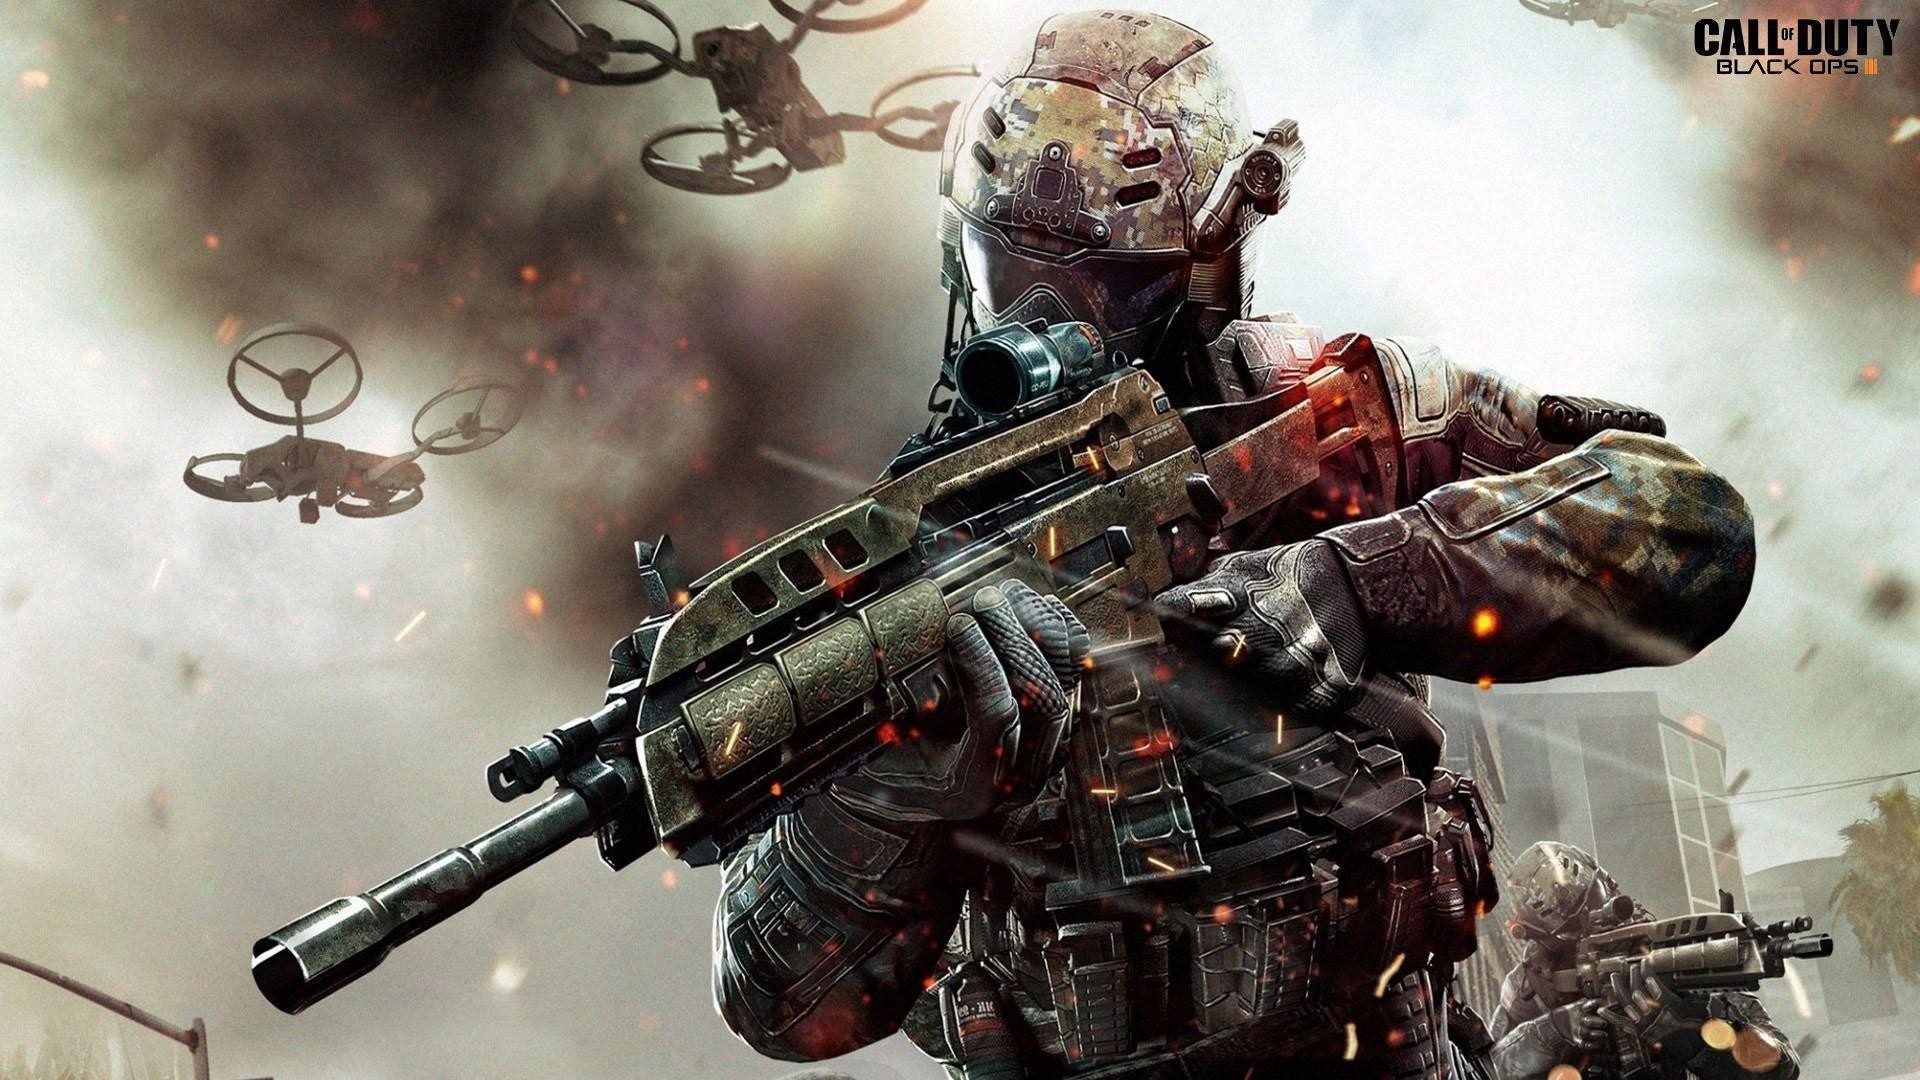 1920x1080 24+ Call of Duty Black Ops 3 wallpapers HD free Download